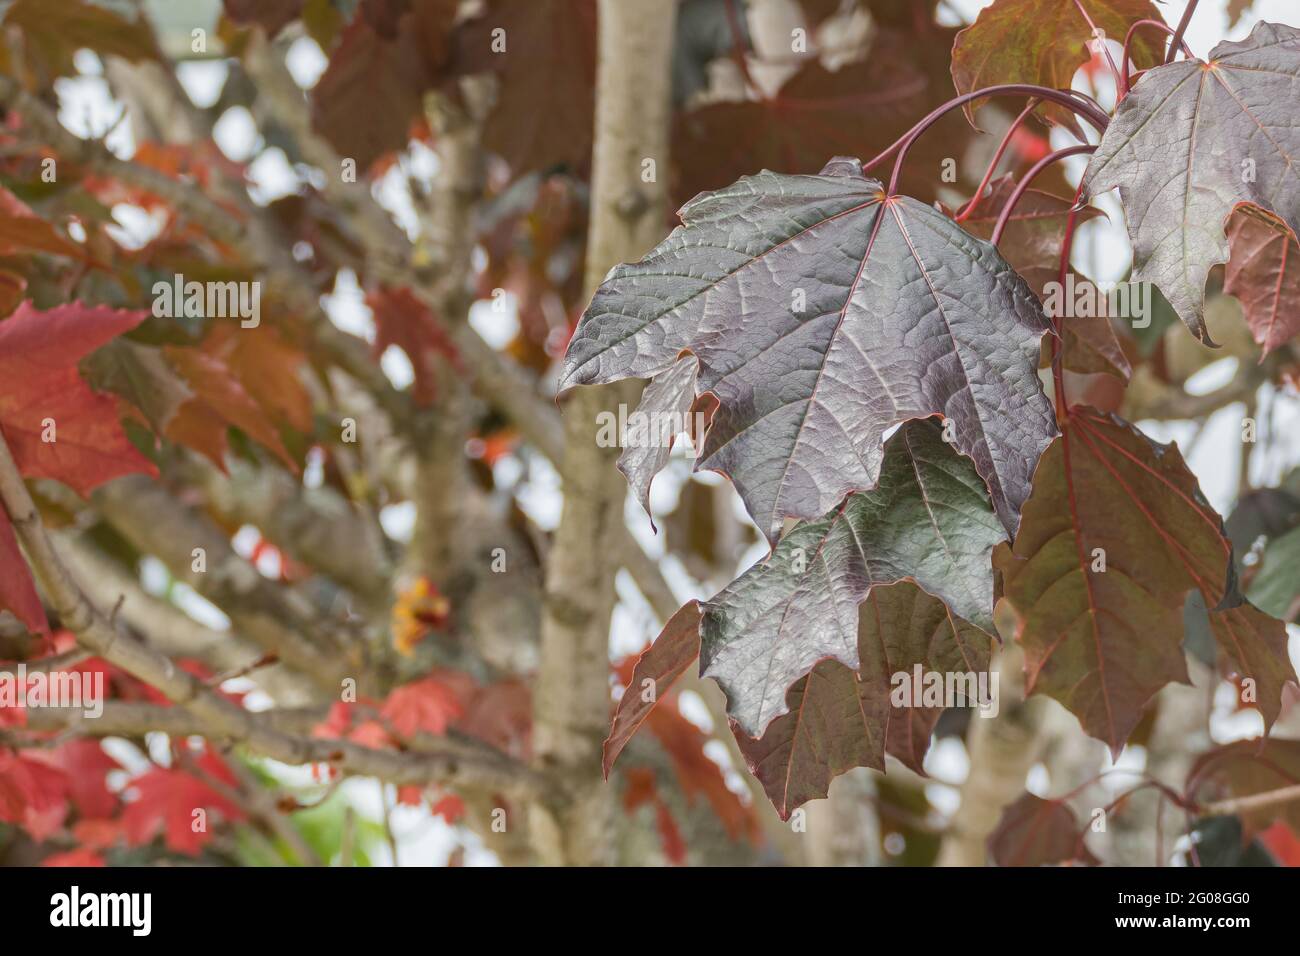 Norway Maple Crimson King leaf growing with daylight in late spring outdoors Stock Photo